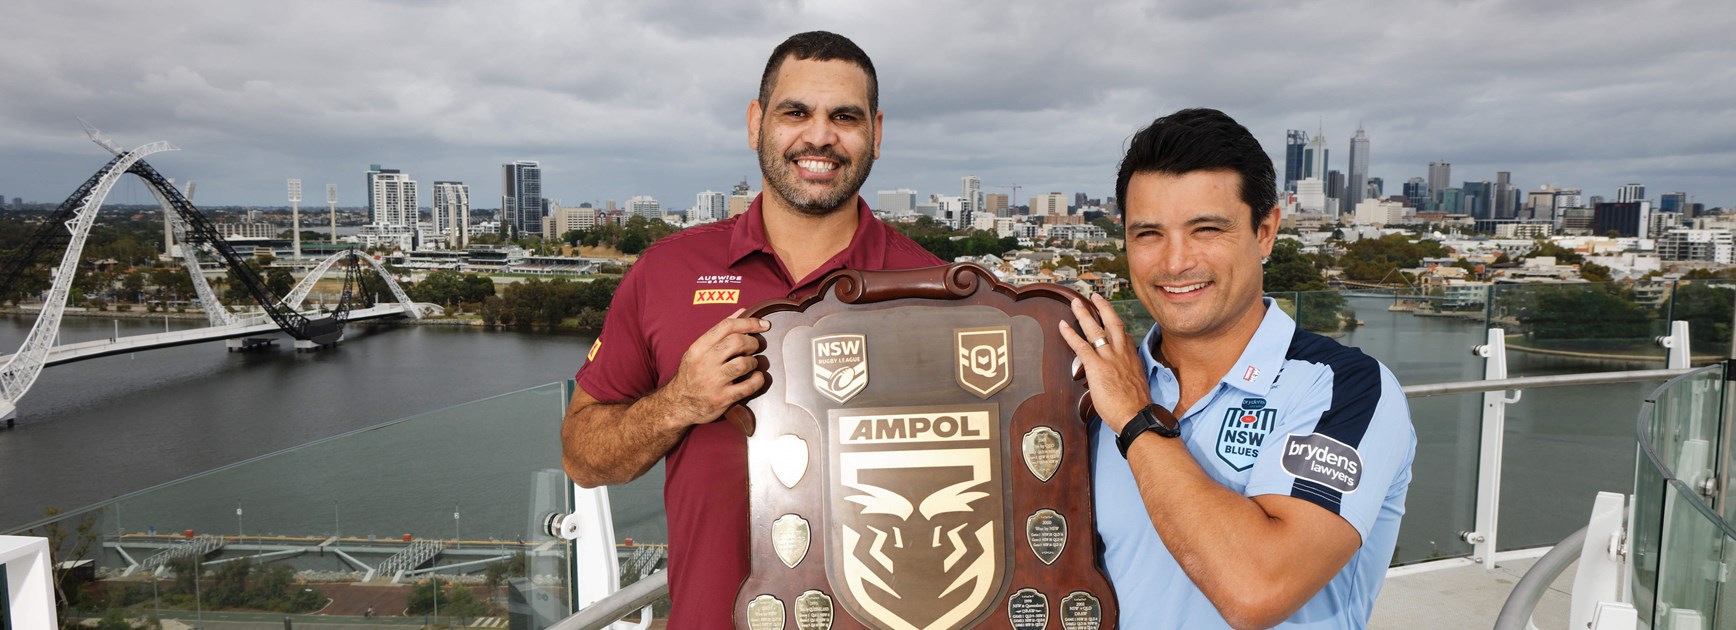 Catch the Origin shield across Perth this week!